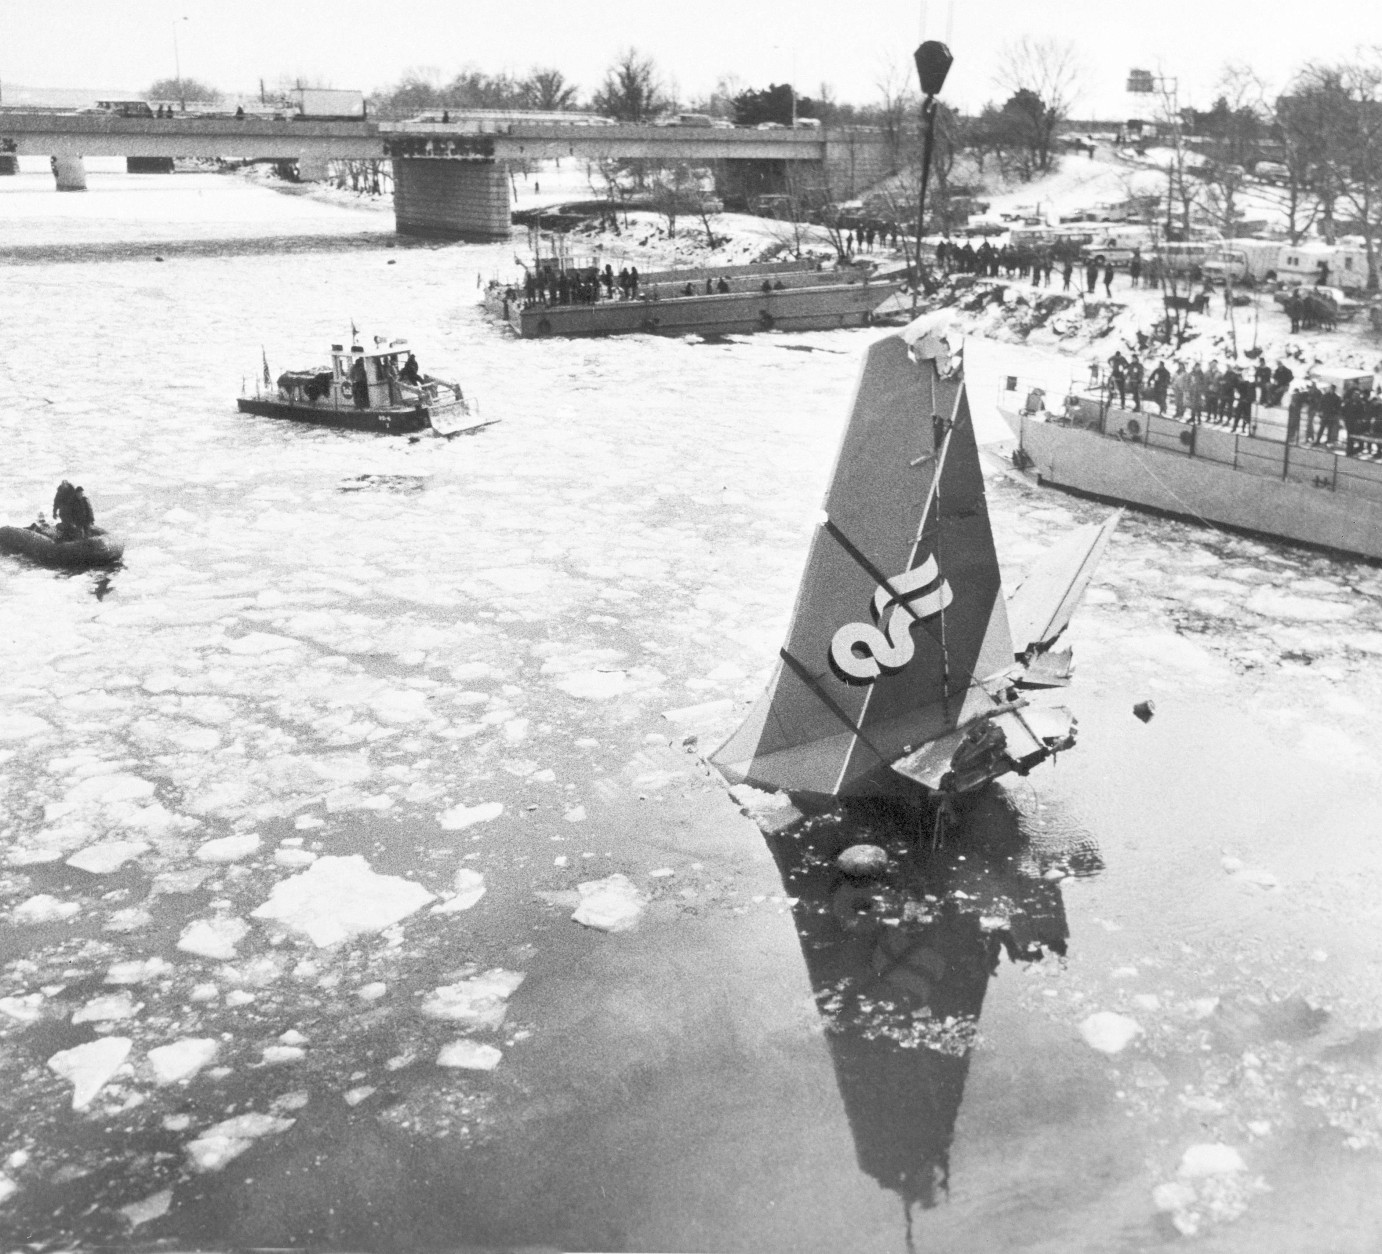 The tail of the Air Florida jet that crashed into the Potomac River in Washington, D.C.,  is hoisted from the water by a crane, Jan. 18, 1982, during salvage efforts. The 14th Street Bridge that the plane hit while taking off from National Airport is pictured in background. (AP Photo)